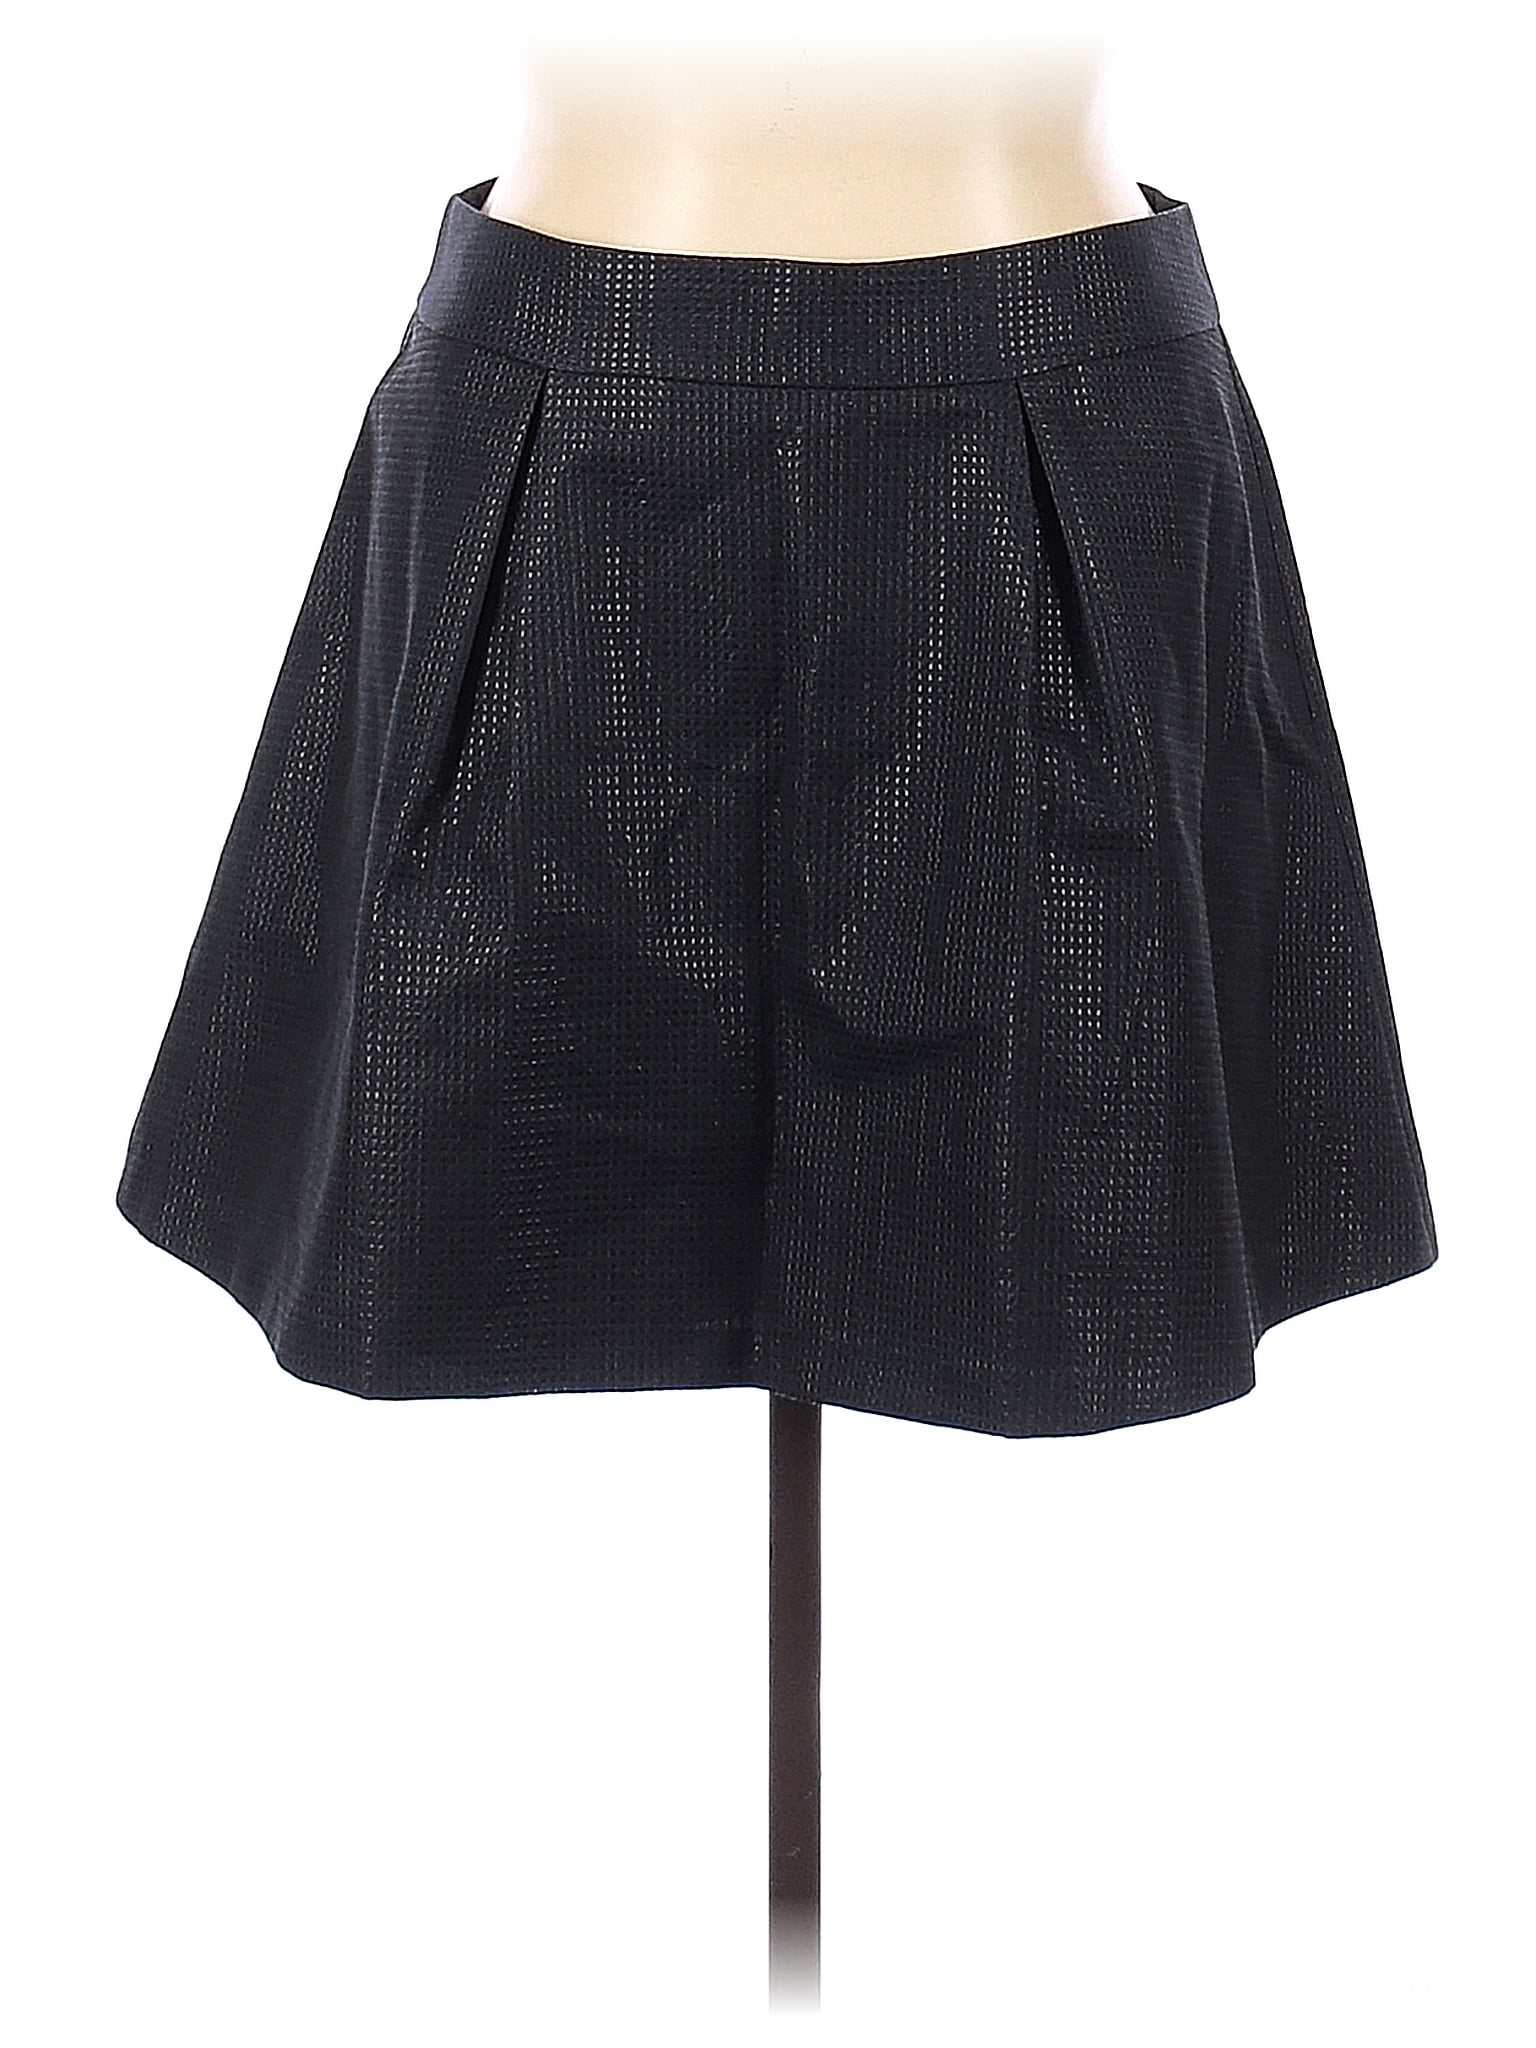 Banana Republic Factory Store Solid Black Formal Skirt Size 14 - 73% ...